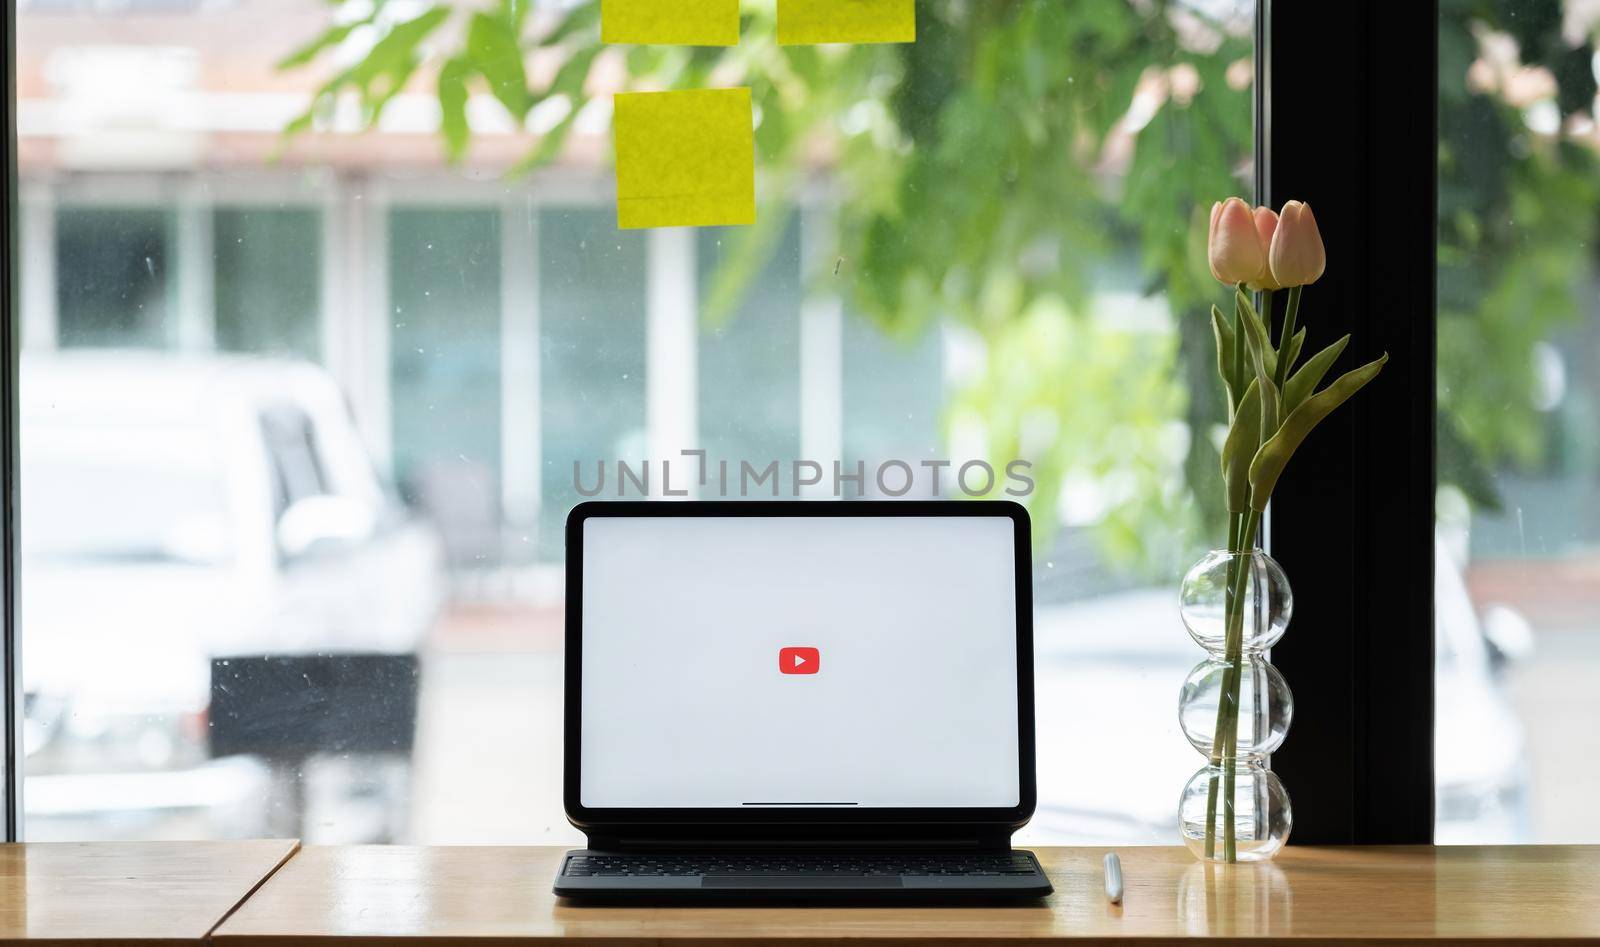 CHIANG MAI, THAILAND - JUNE 6, 2021 : YouTube logo on the screen iPad Pro. YouTube is the popular website